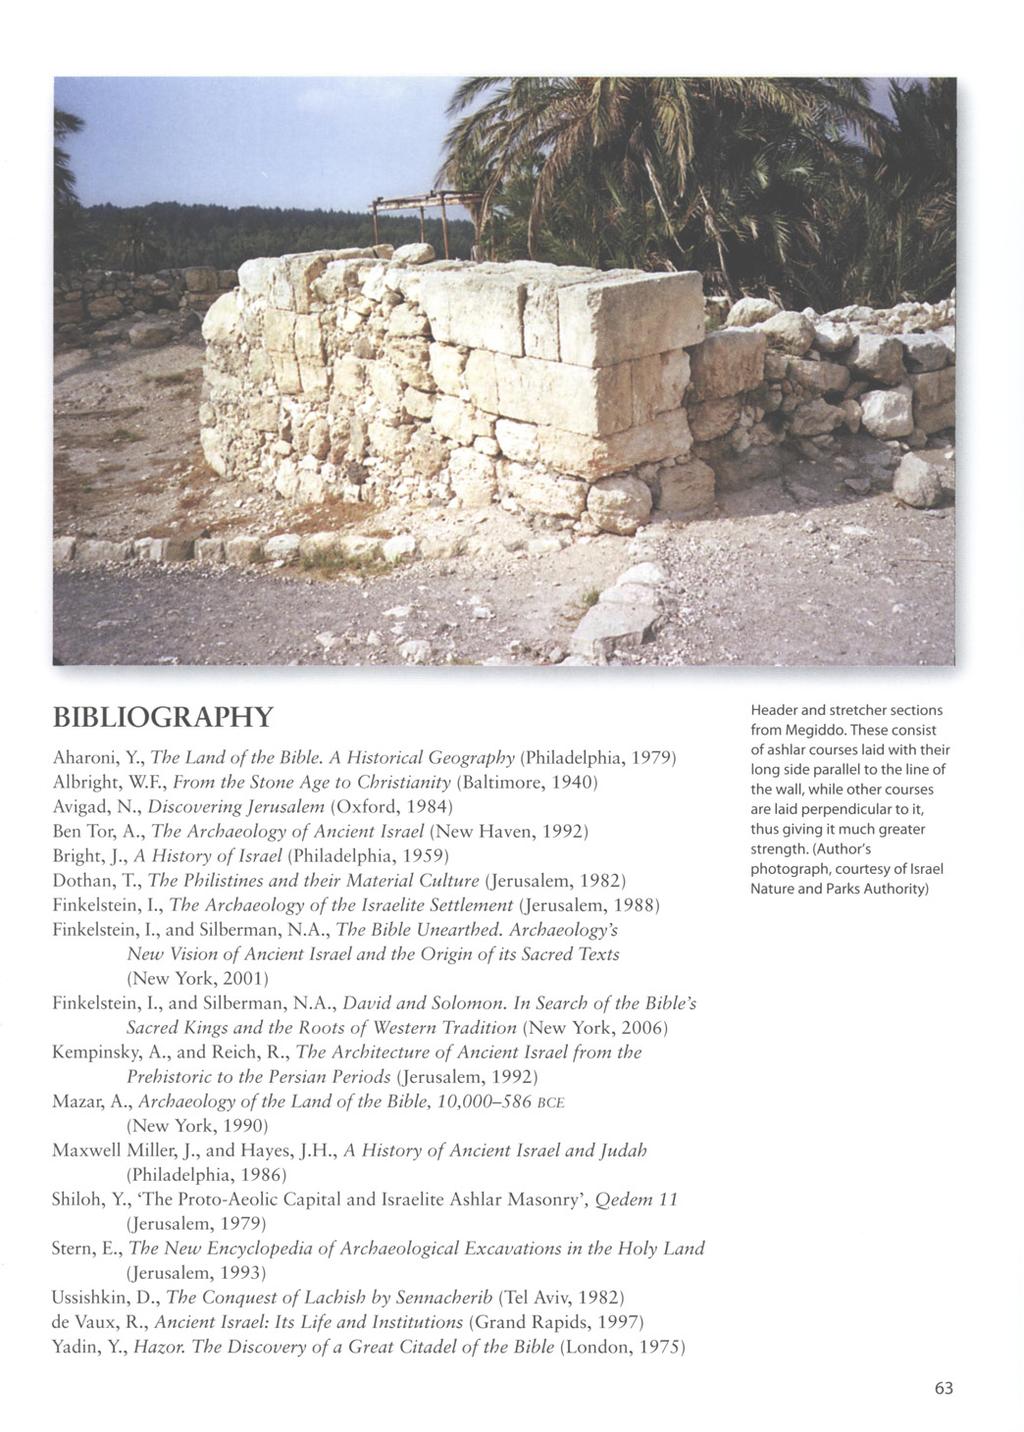 BIBLIOGRAPHY Aharoni, Y., The Land of the Bible. A Historical Geography (Philadelphia, 1979) Albright, W.F., From the Stone Age to Christianity (Baltimore, 1940) Avigad, N.